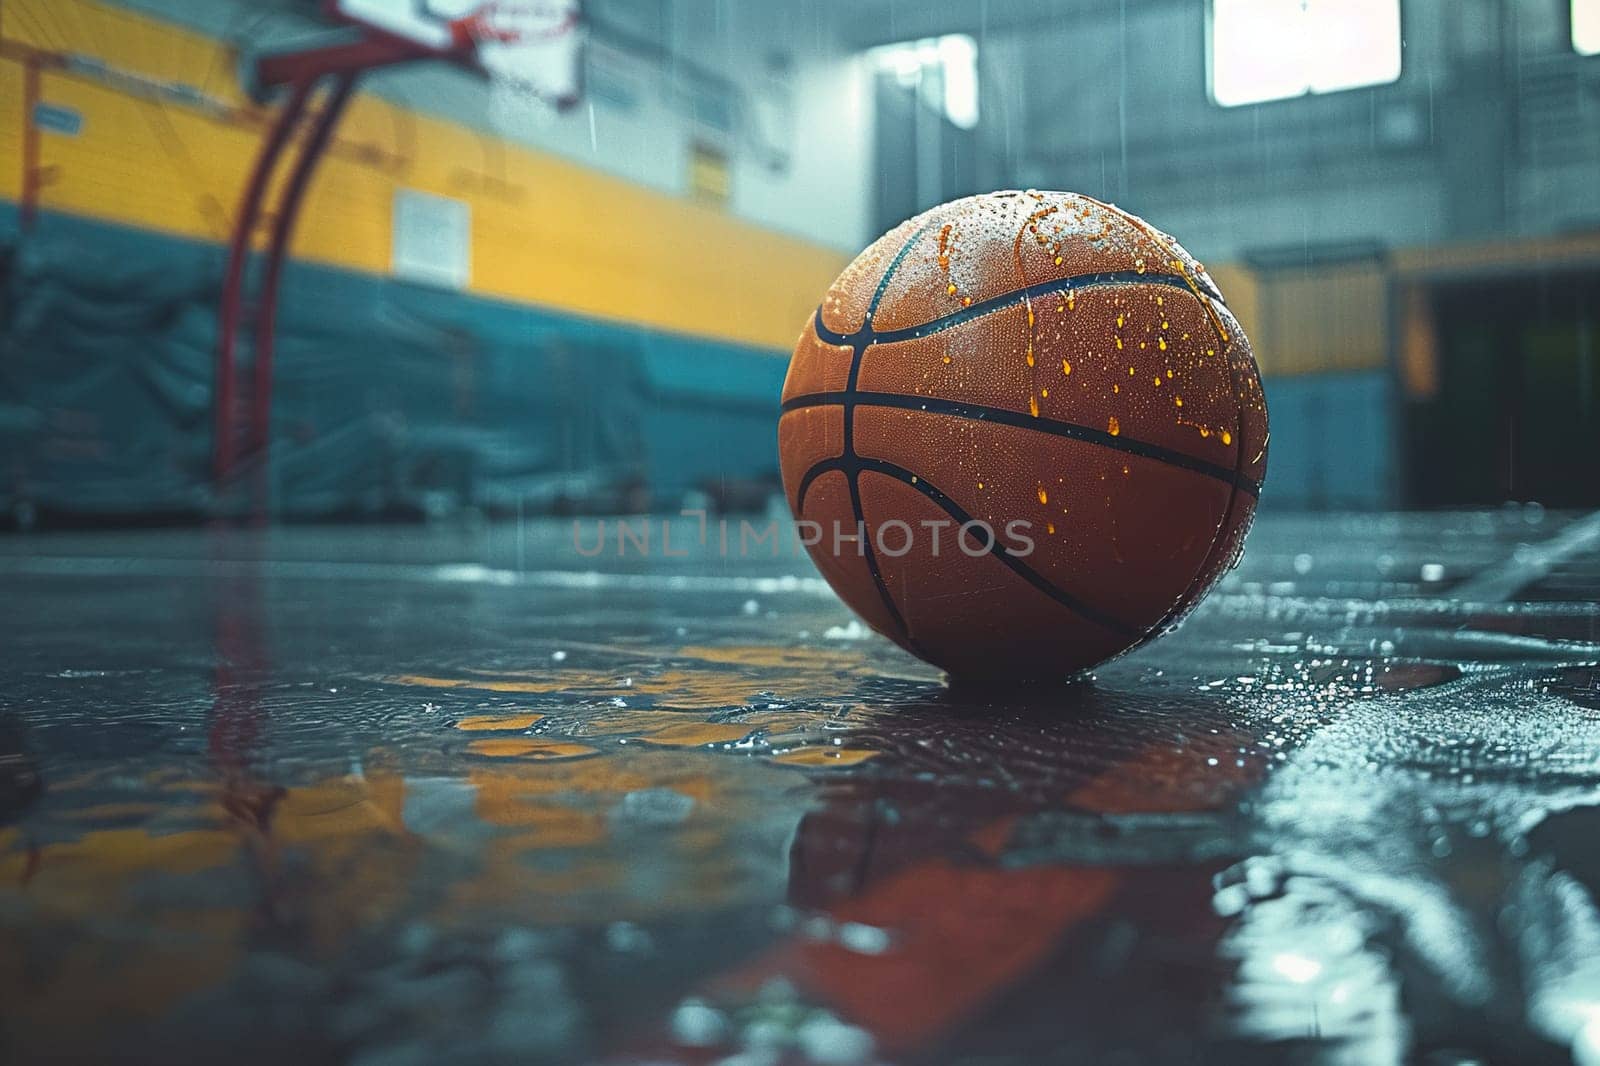 Close-up of a basketball on a wooden floor. Vintage style. Hobbies and recreation.